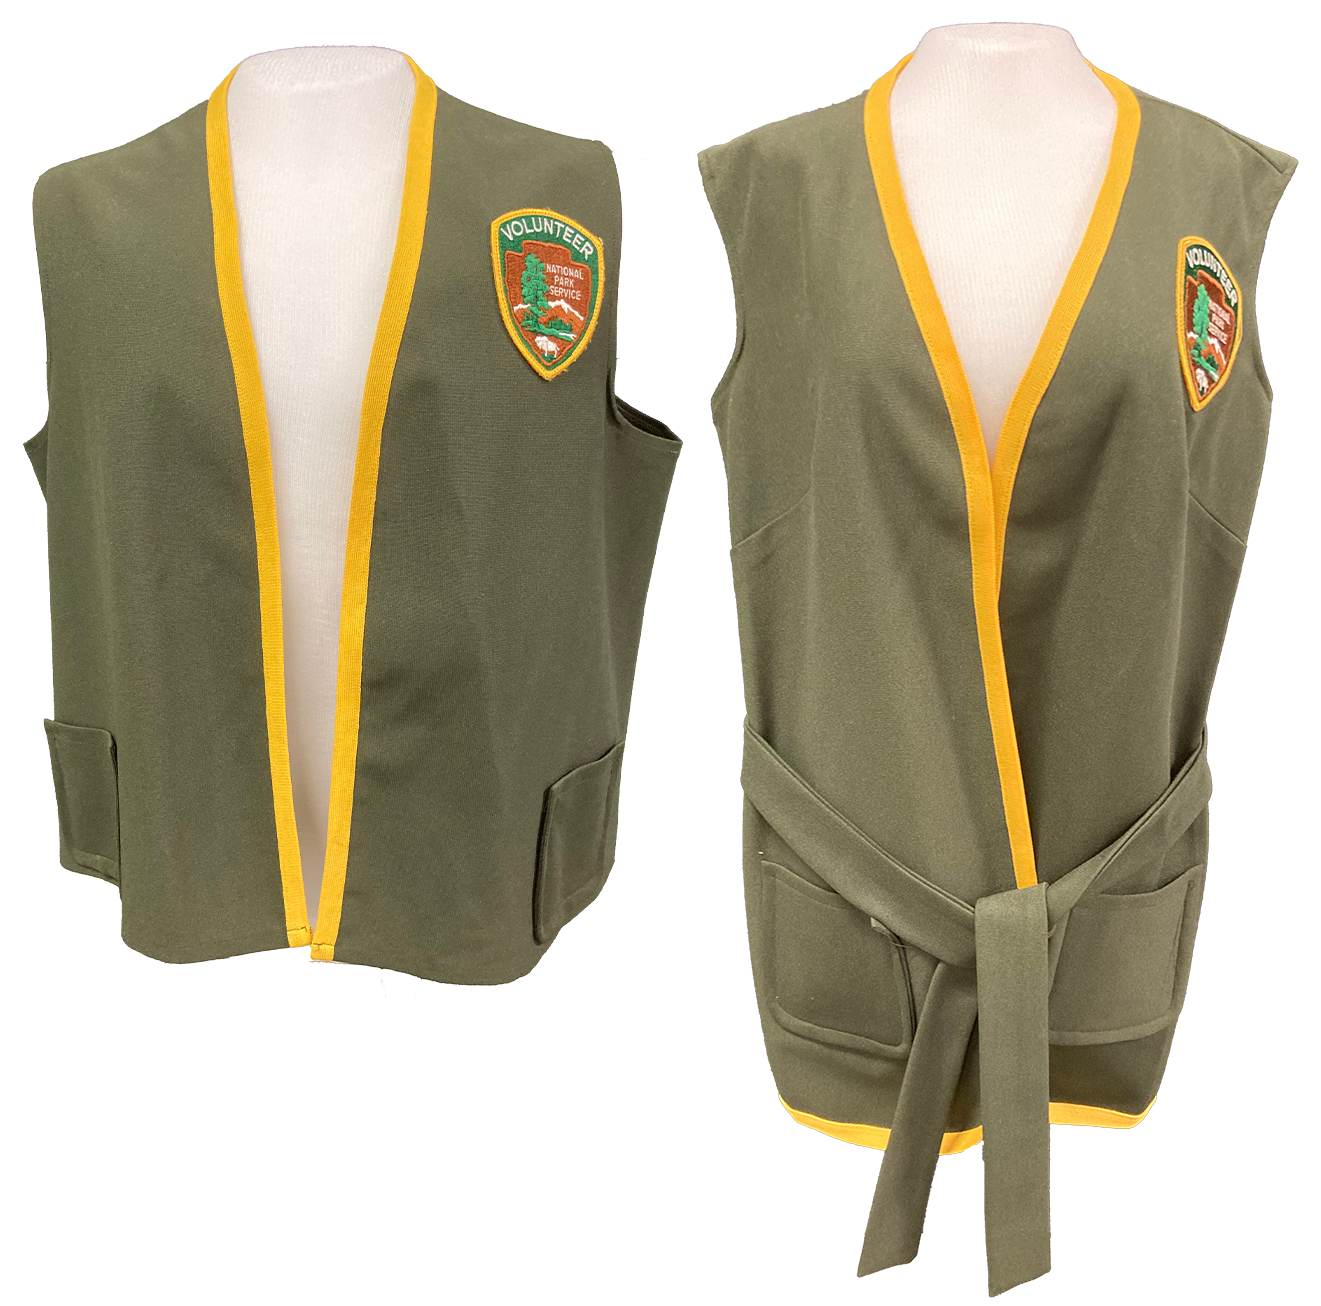 Two green volunteer vests, one hip length and one waist length